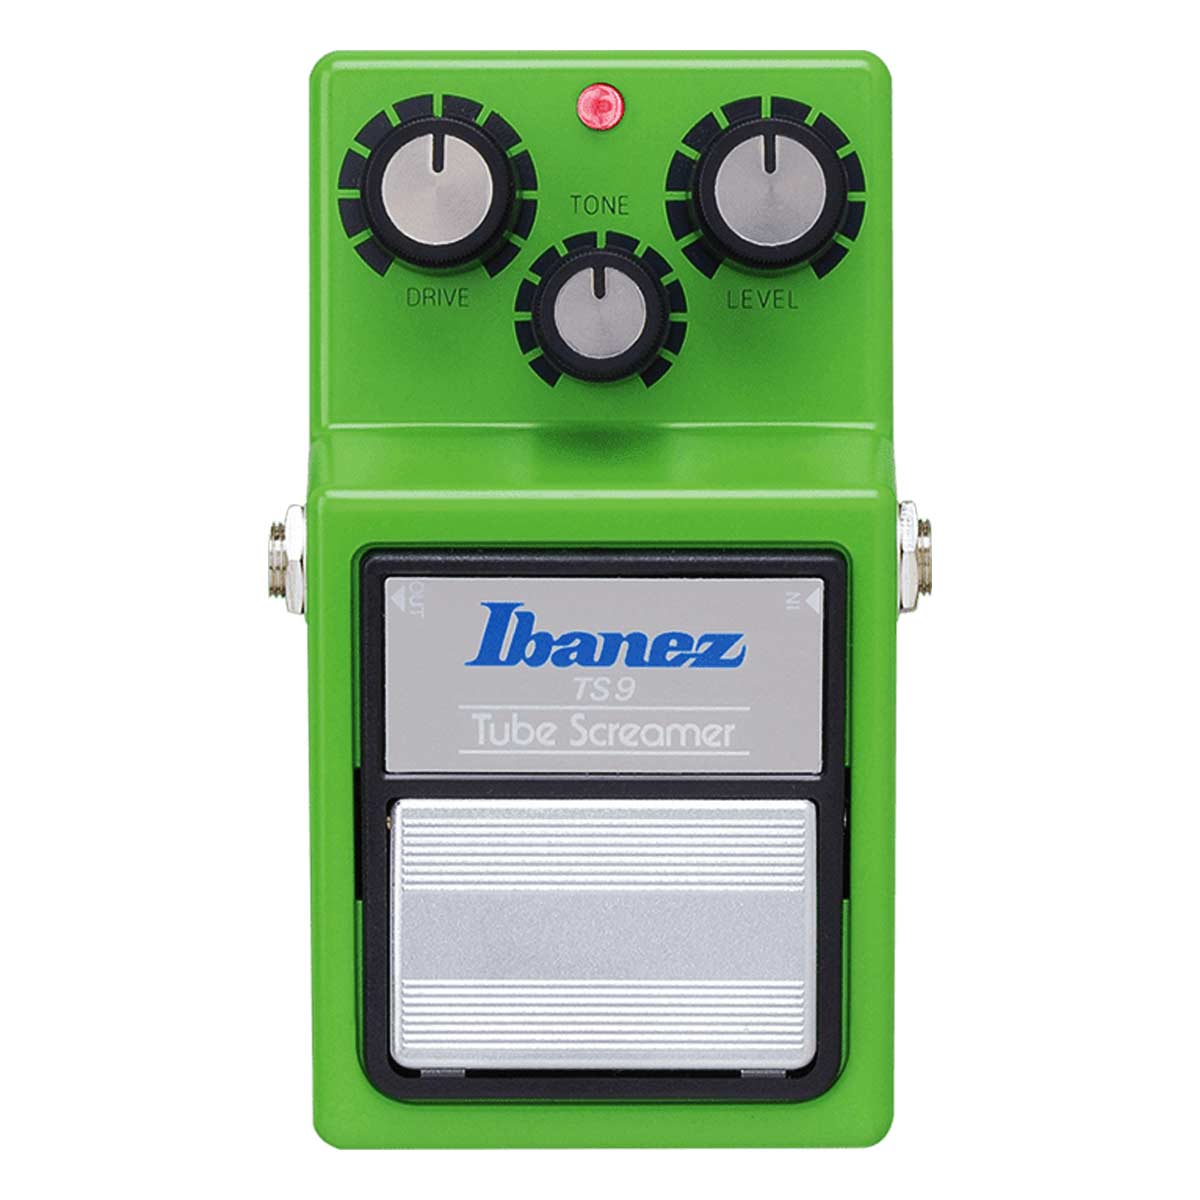 Ibanez TS9 Tube Screamer Overdrive Effects Pedal-Andy's Music